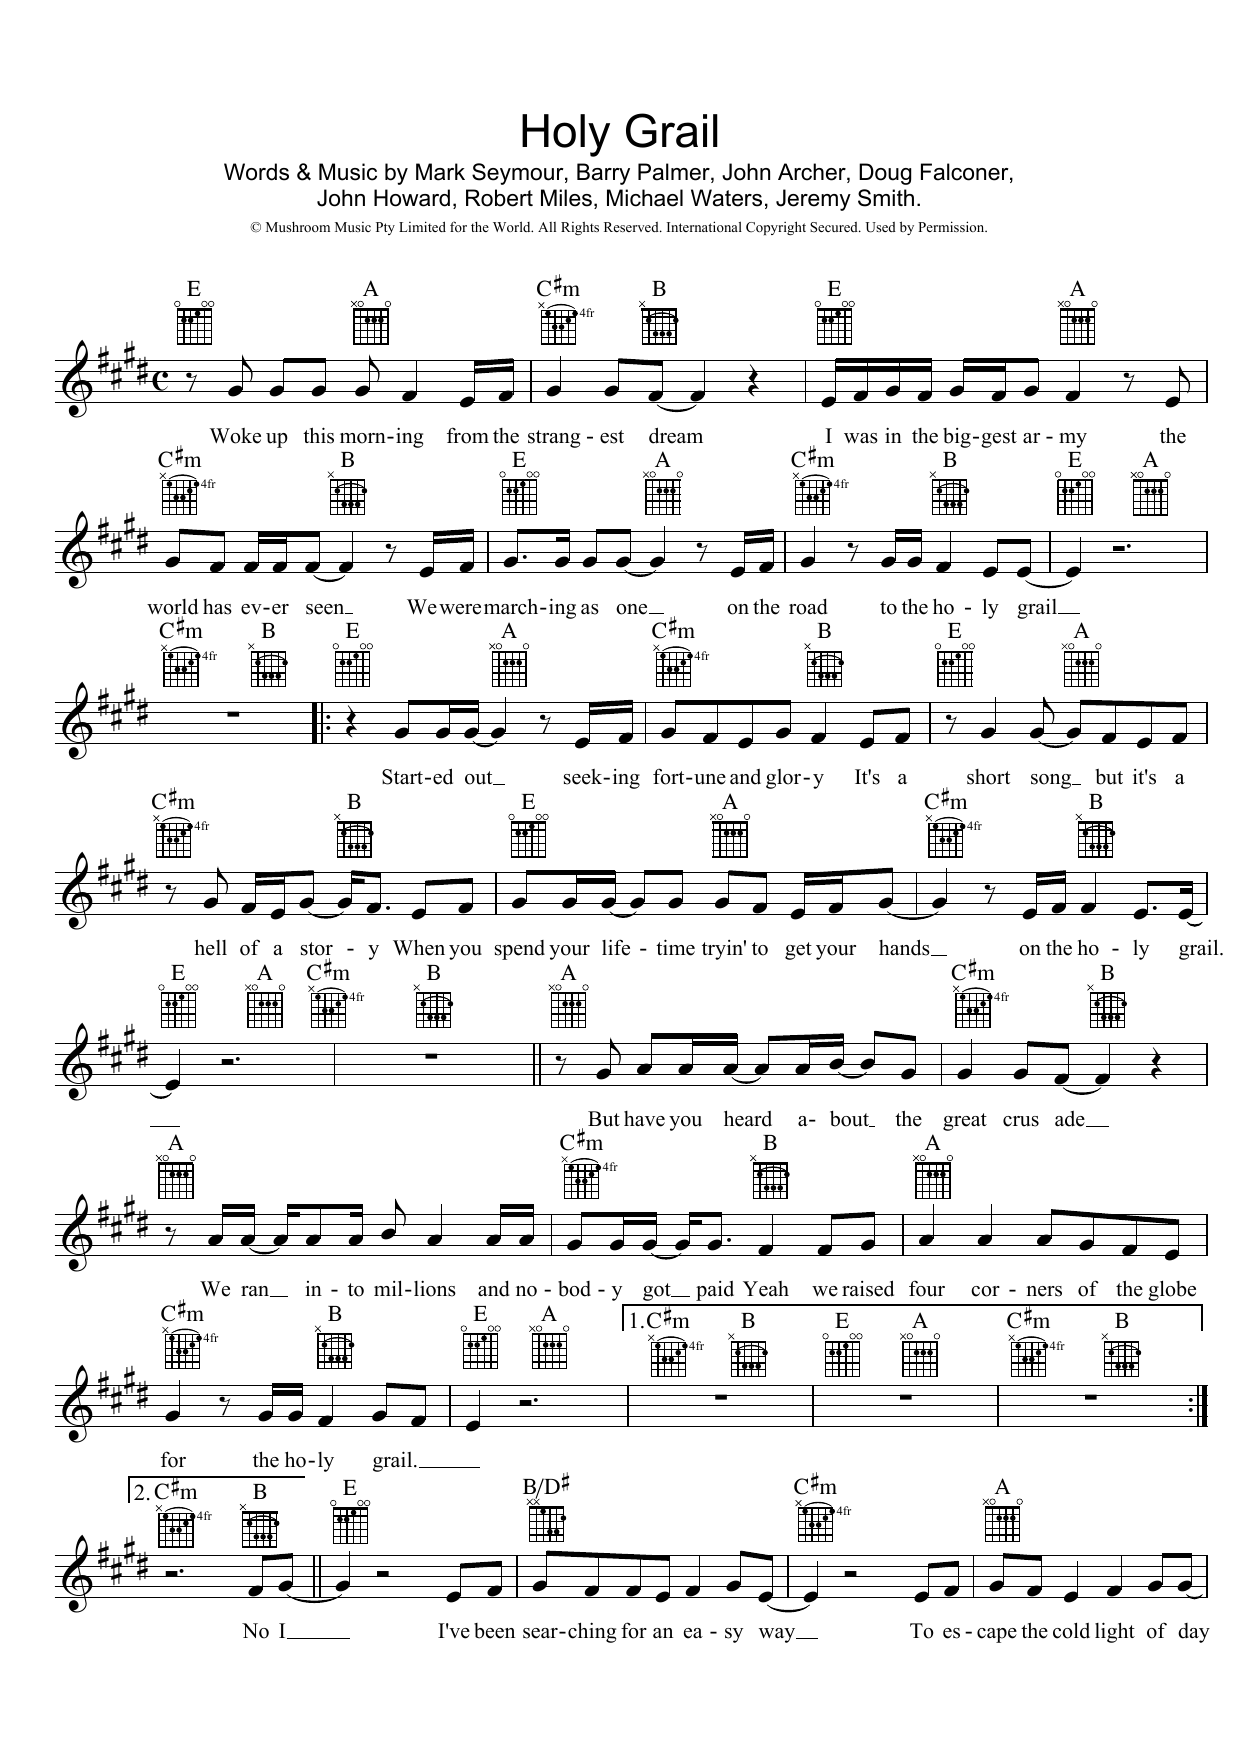 Download Hunters & Collectors Holy Grail Sheet Music